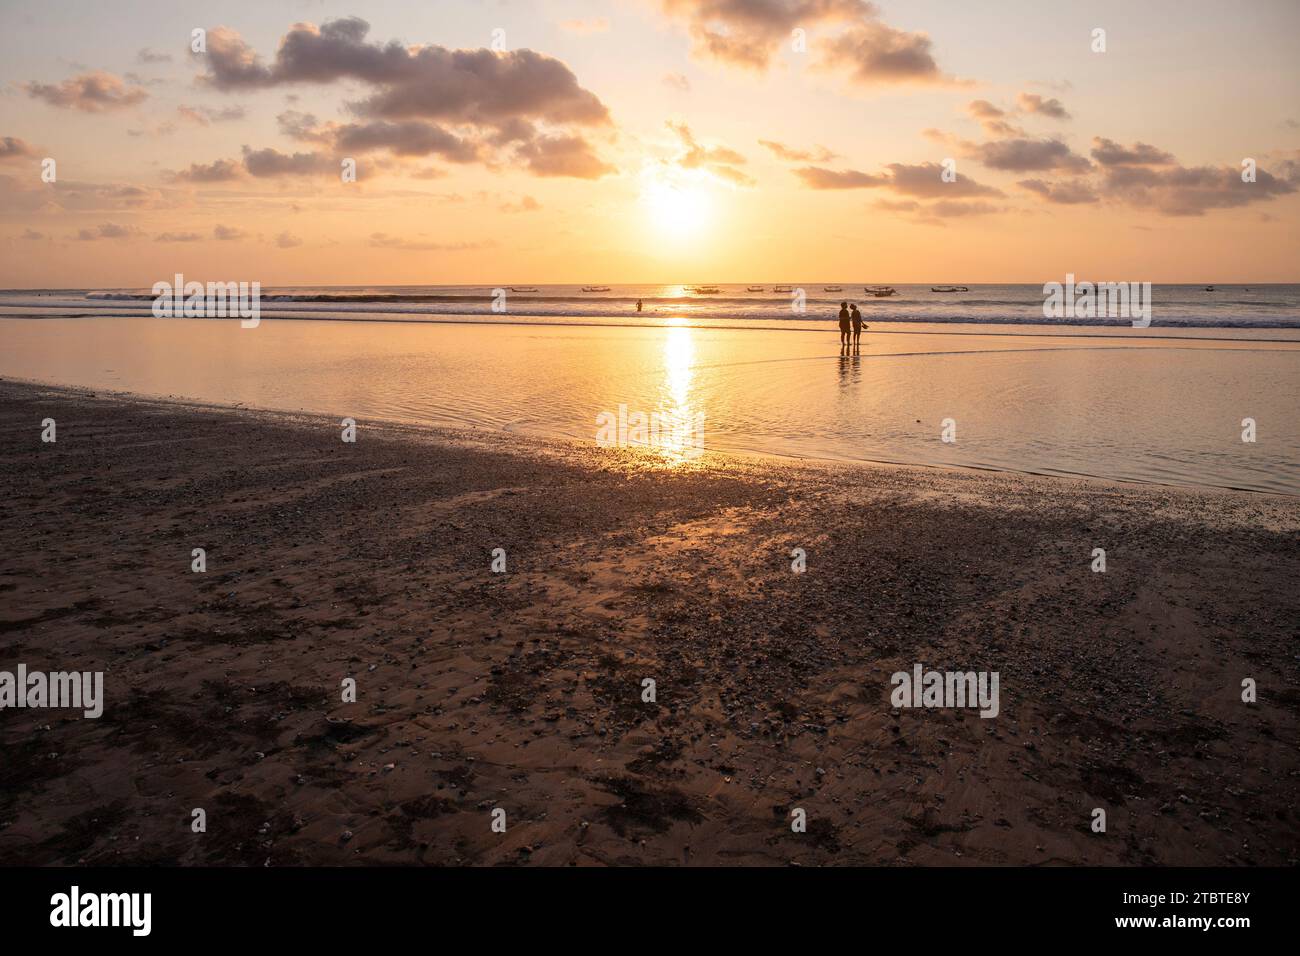 Dreamlike sunset on the dream beach of Kuta, small waves in the sea and the reflection of the sky in the shallow water, tropical Bali, Indonesia Stock Photo